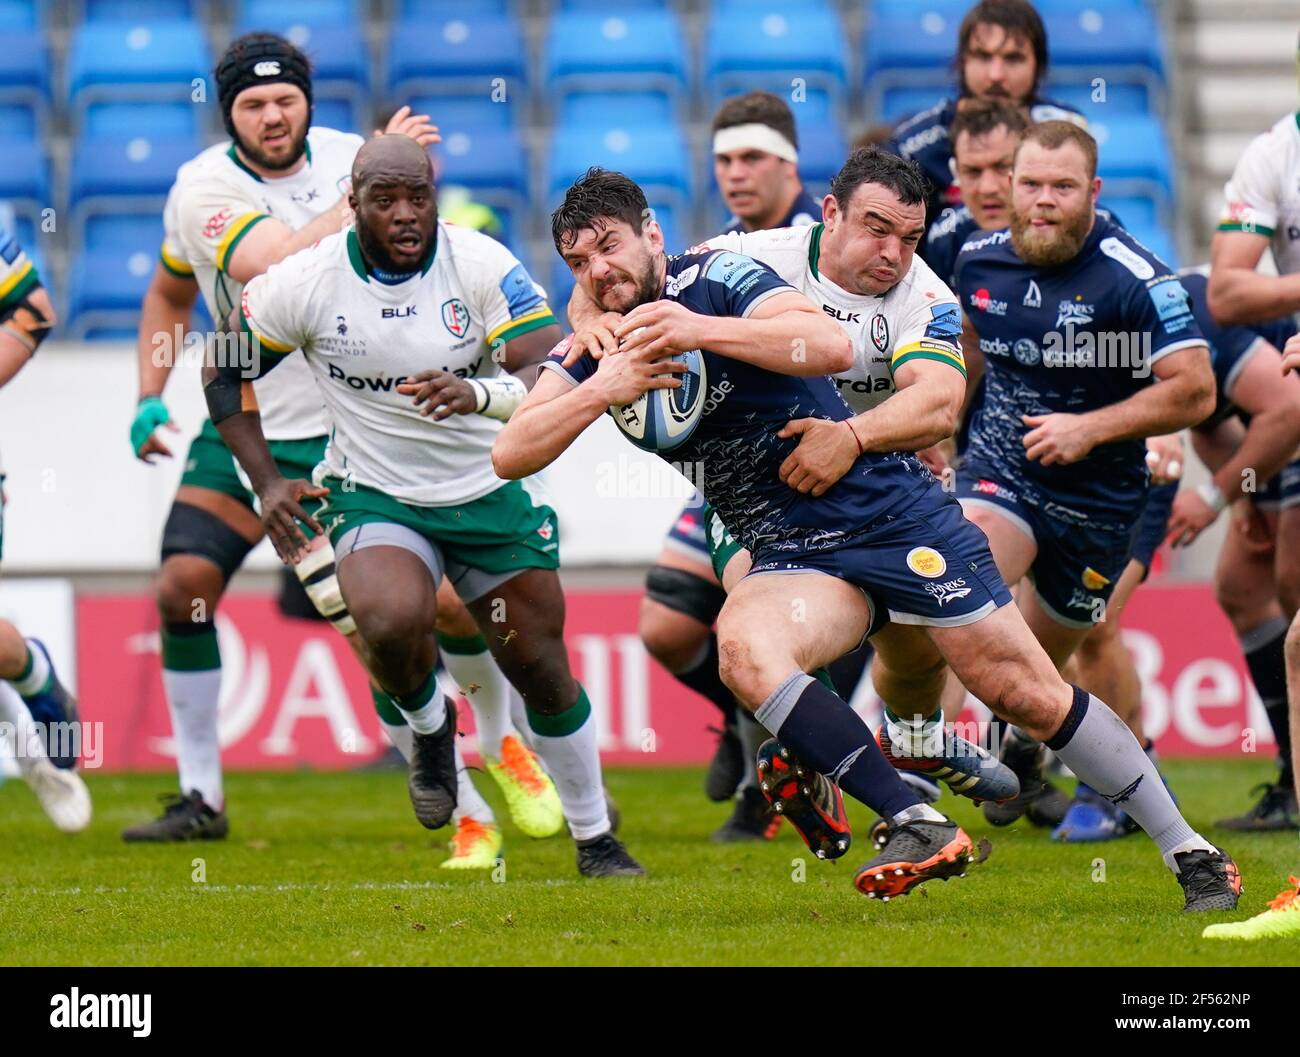 Sale Sharks flanker Cameron Neild breaks past London Irish Hooker Agustín Creevy during a Gallagher Premiership Round 14 Rugby Union match, Sunday, Ma Stock Photo